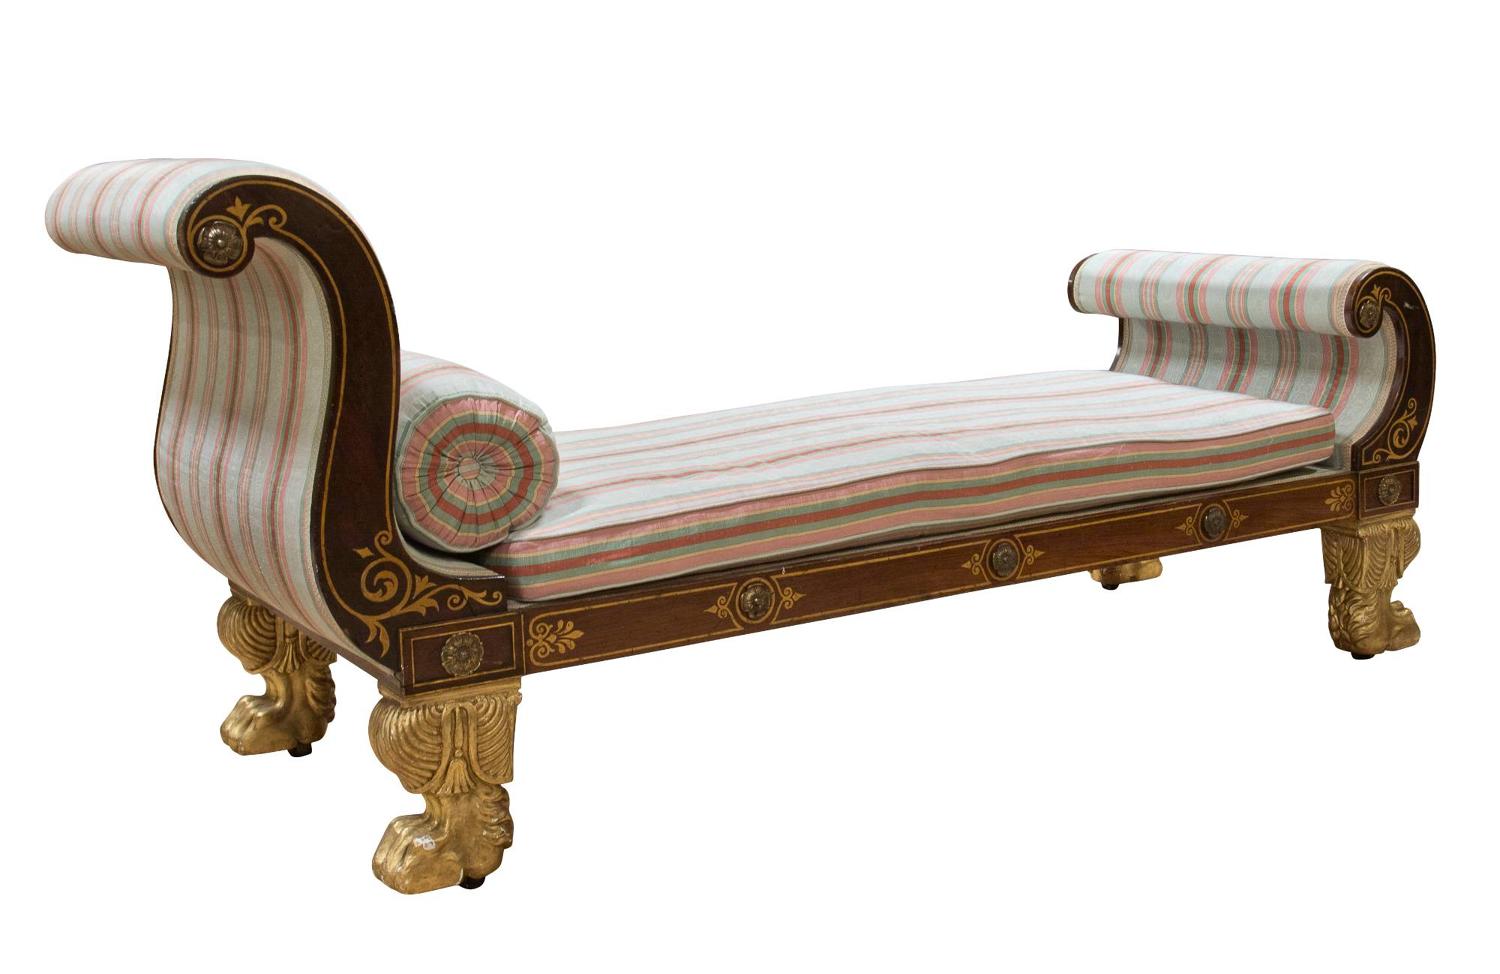 Regency Faux Rosewood and Ormolu Mounted Chaise Longue